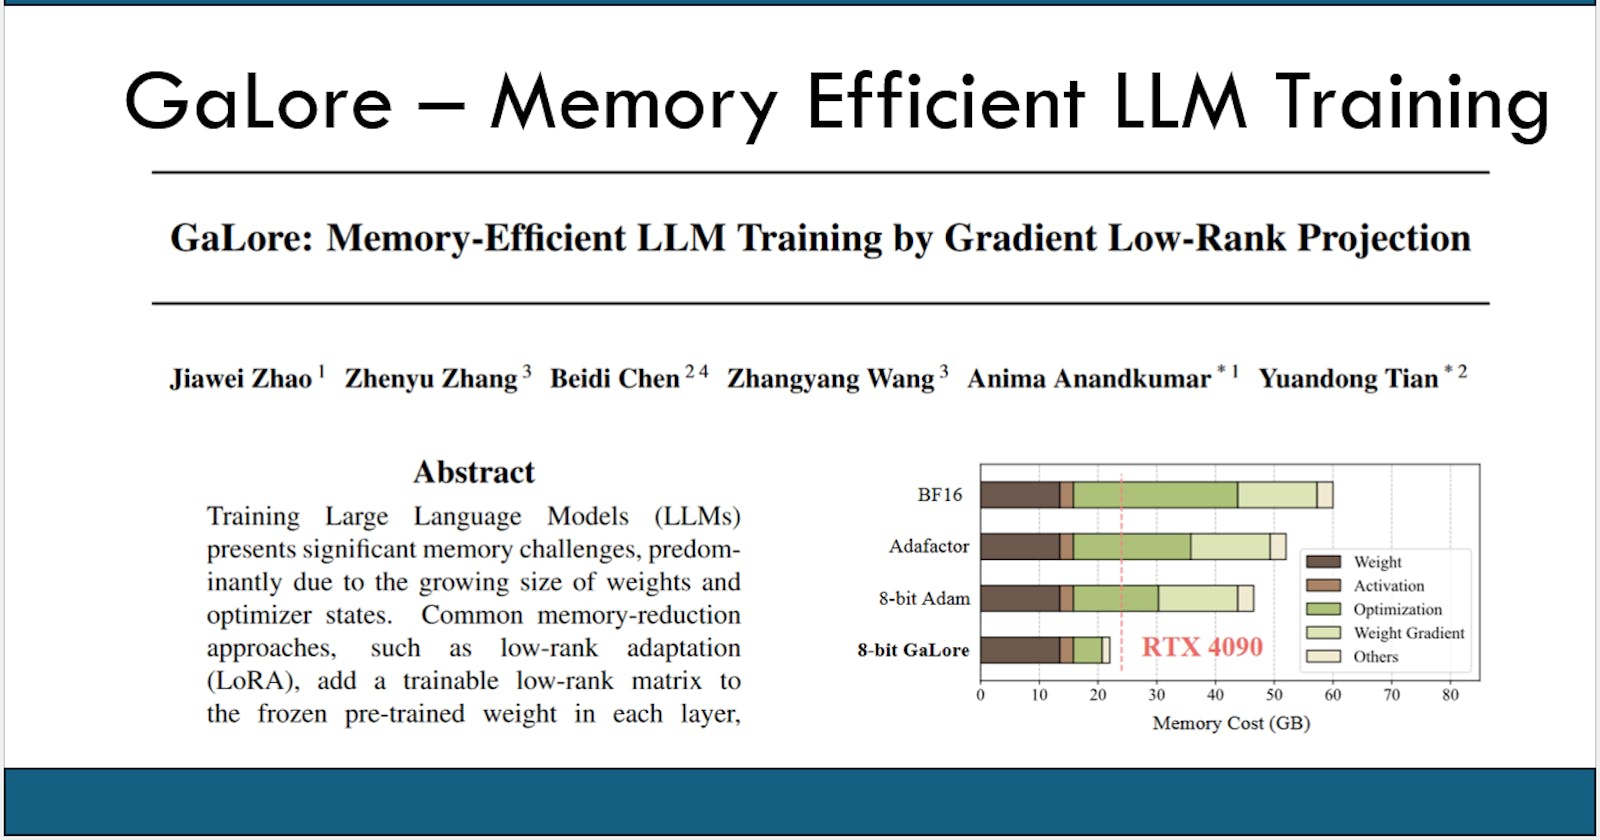 GaLore: Memory-Efficient LLM Training by Gradient Low-Rank Projection